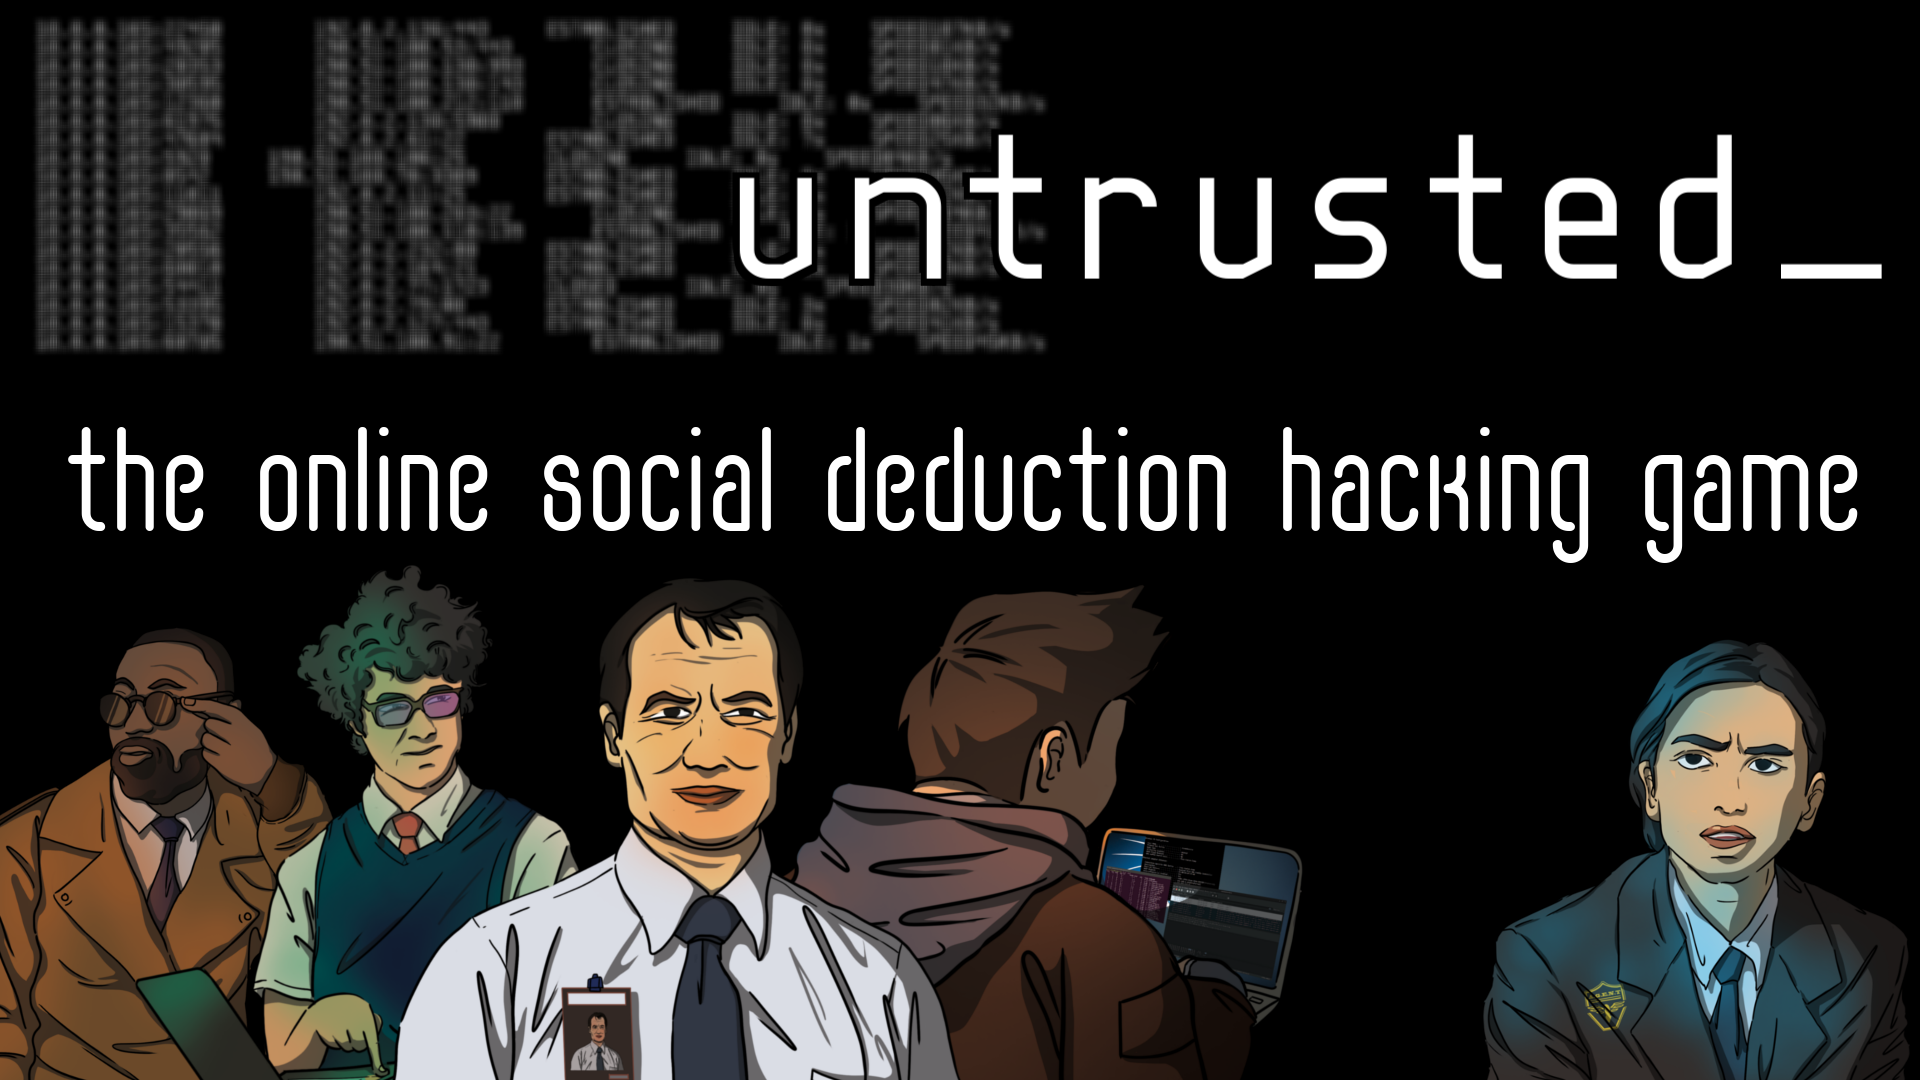 Social deduction hacking game Untrusted looking for stress-test players